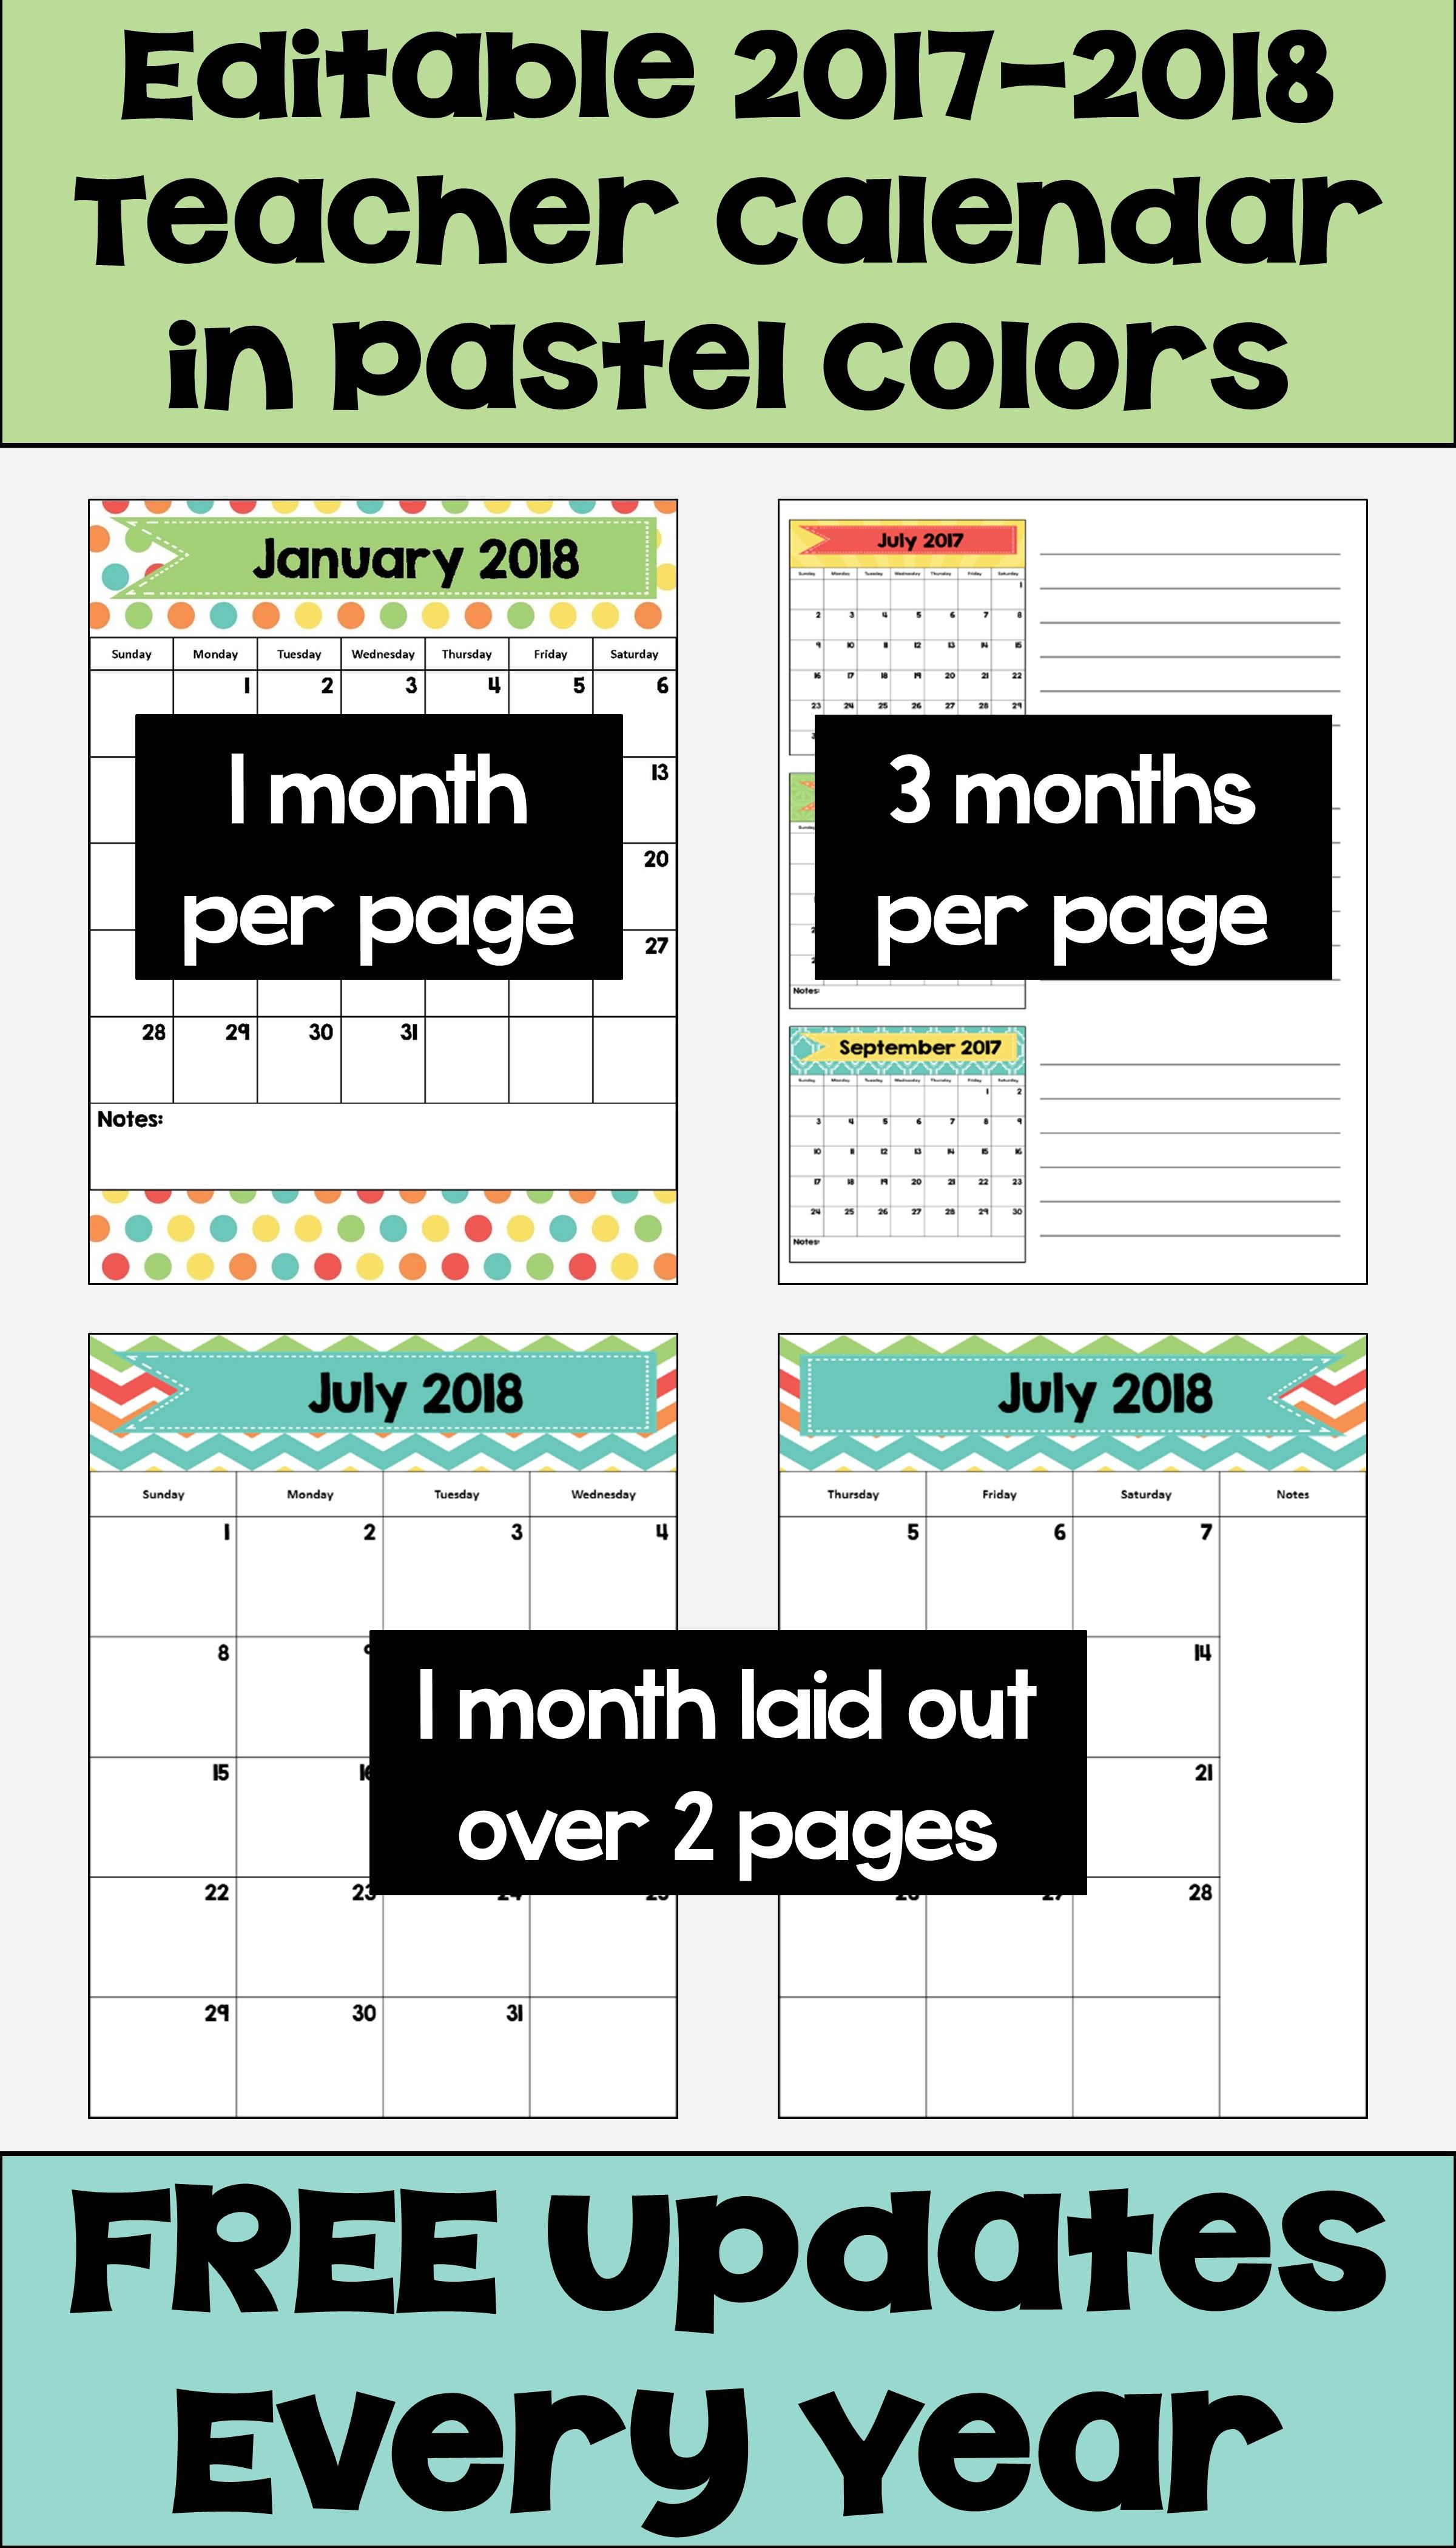 2019-2020 Calendar Printable And Editable With Free Updates